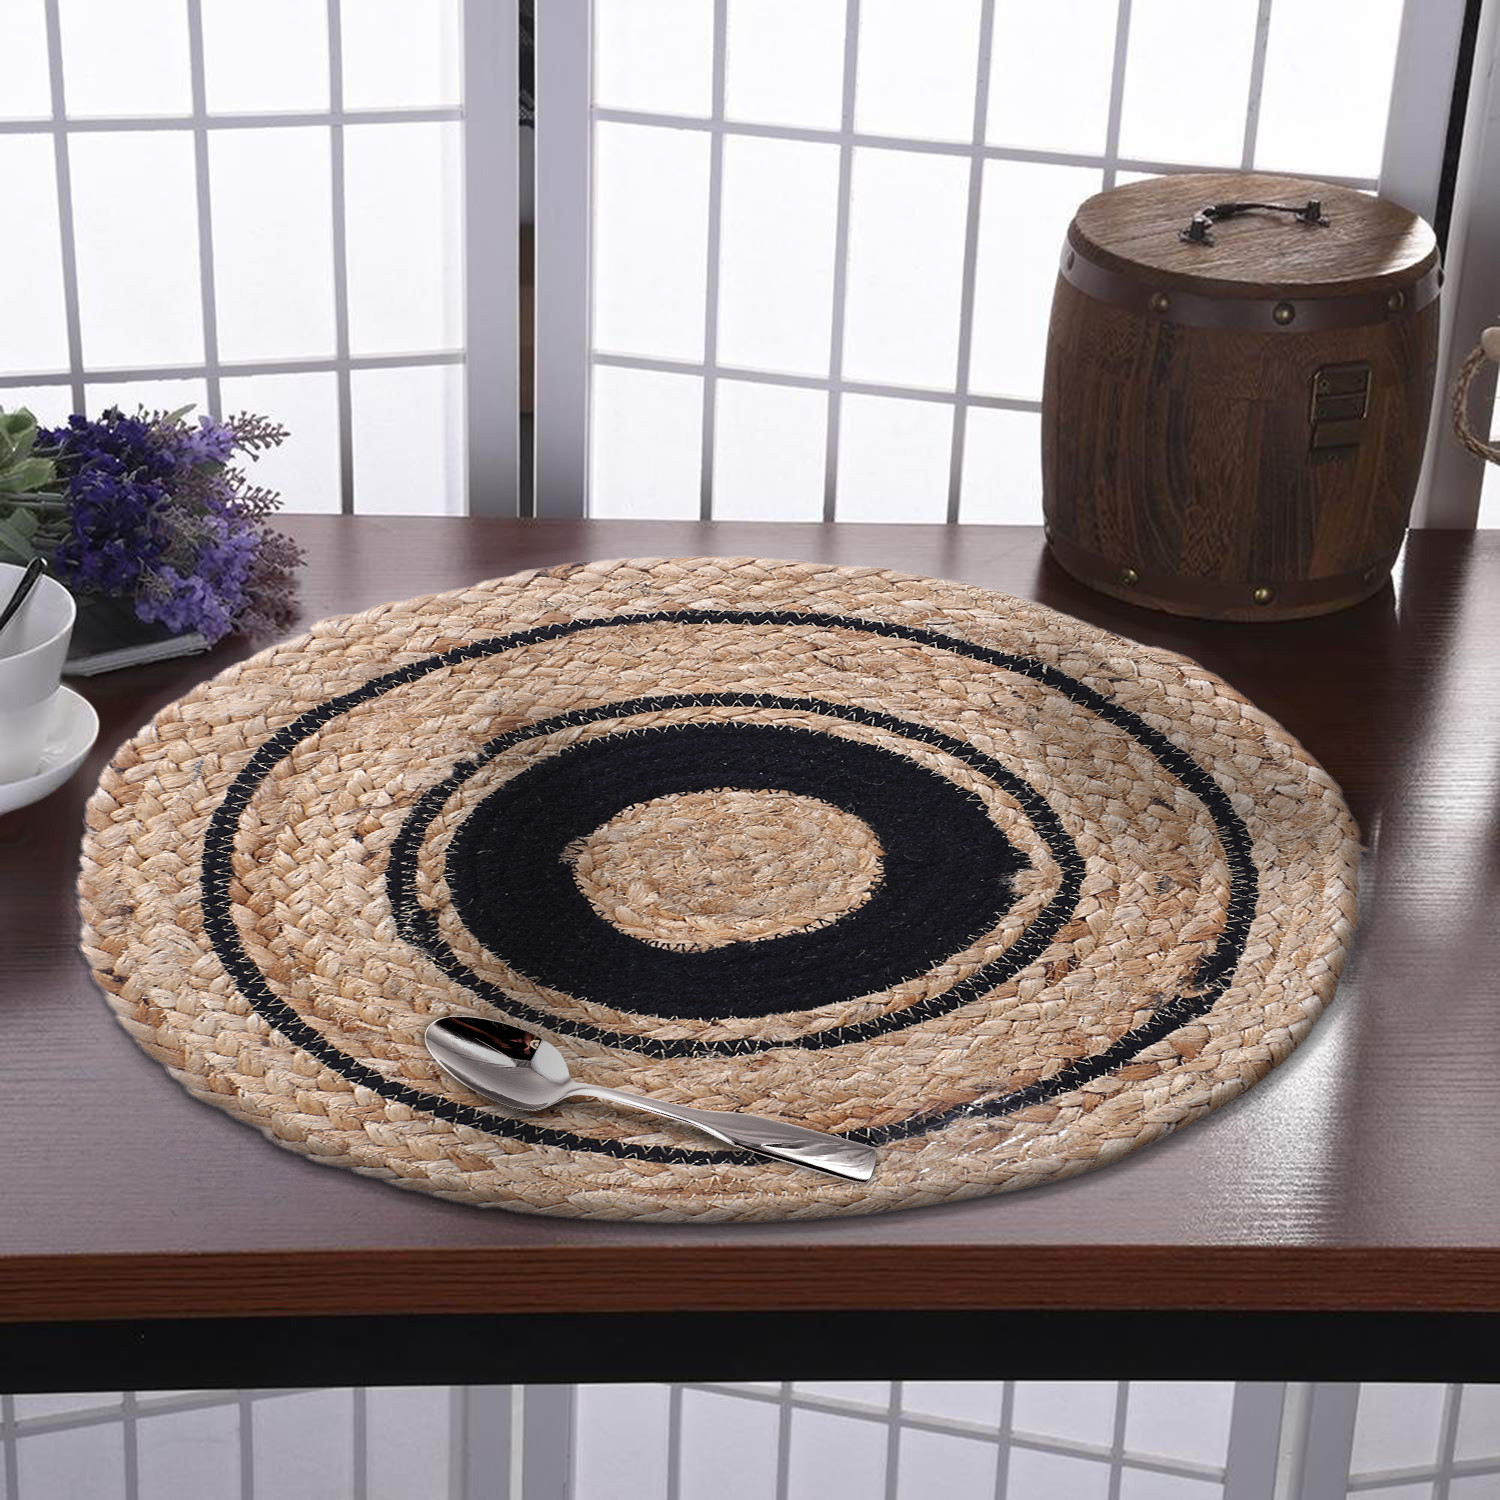 Kuber Industries Handmade Carpet|Cotton Circular Shape Black Layer Placemat|Jute Table Top Mat For Living Room,Dining Room & Home Décor,35x35 cm,(Brown)